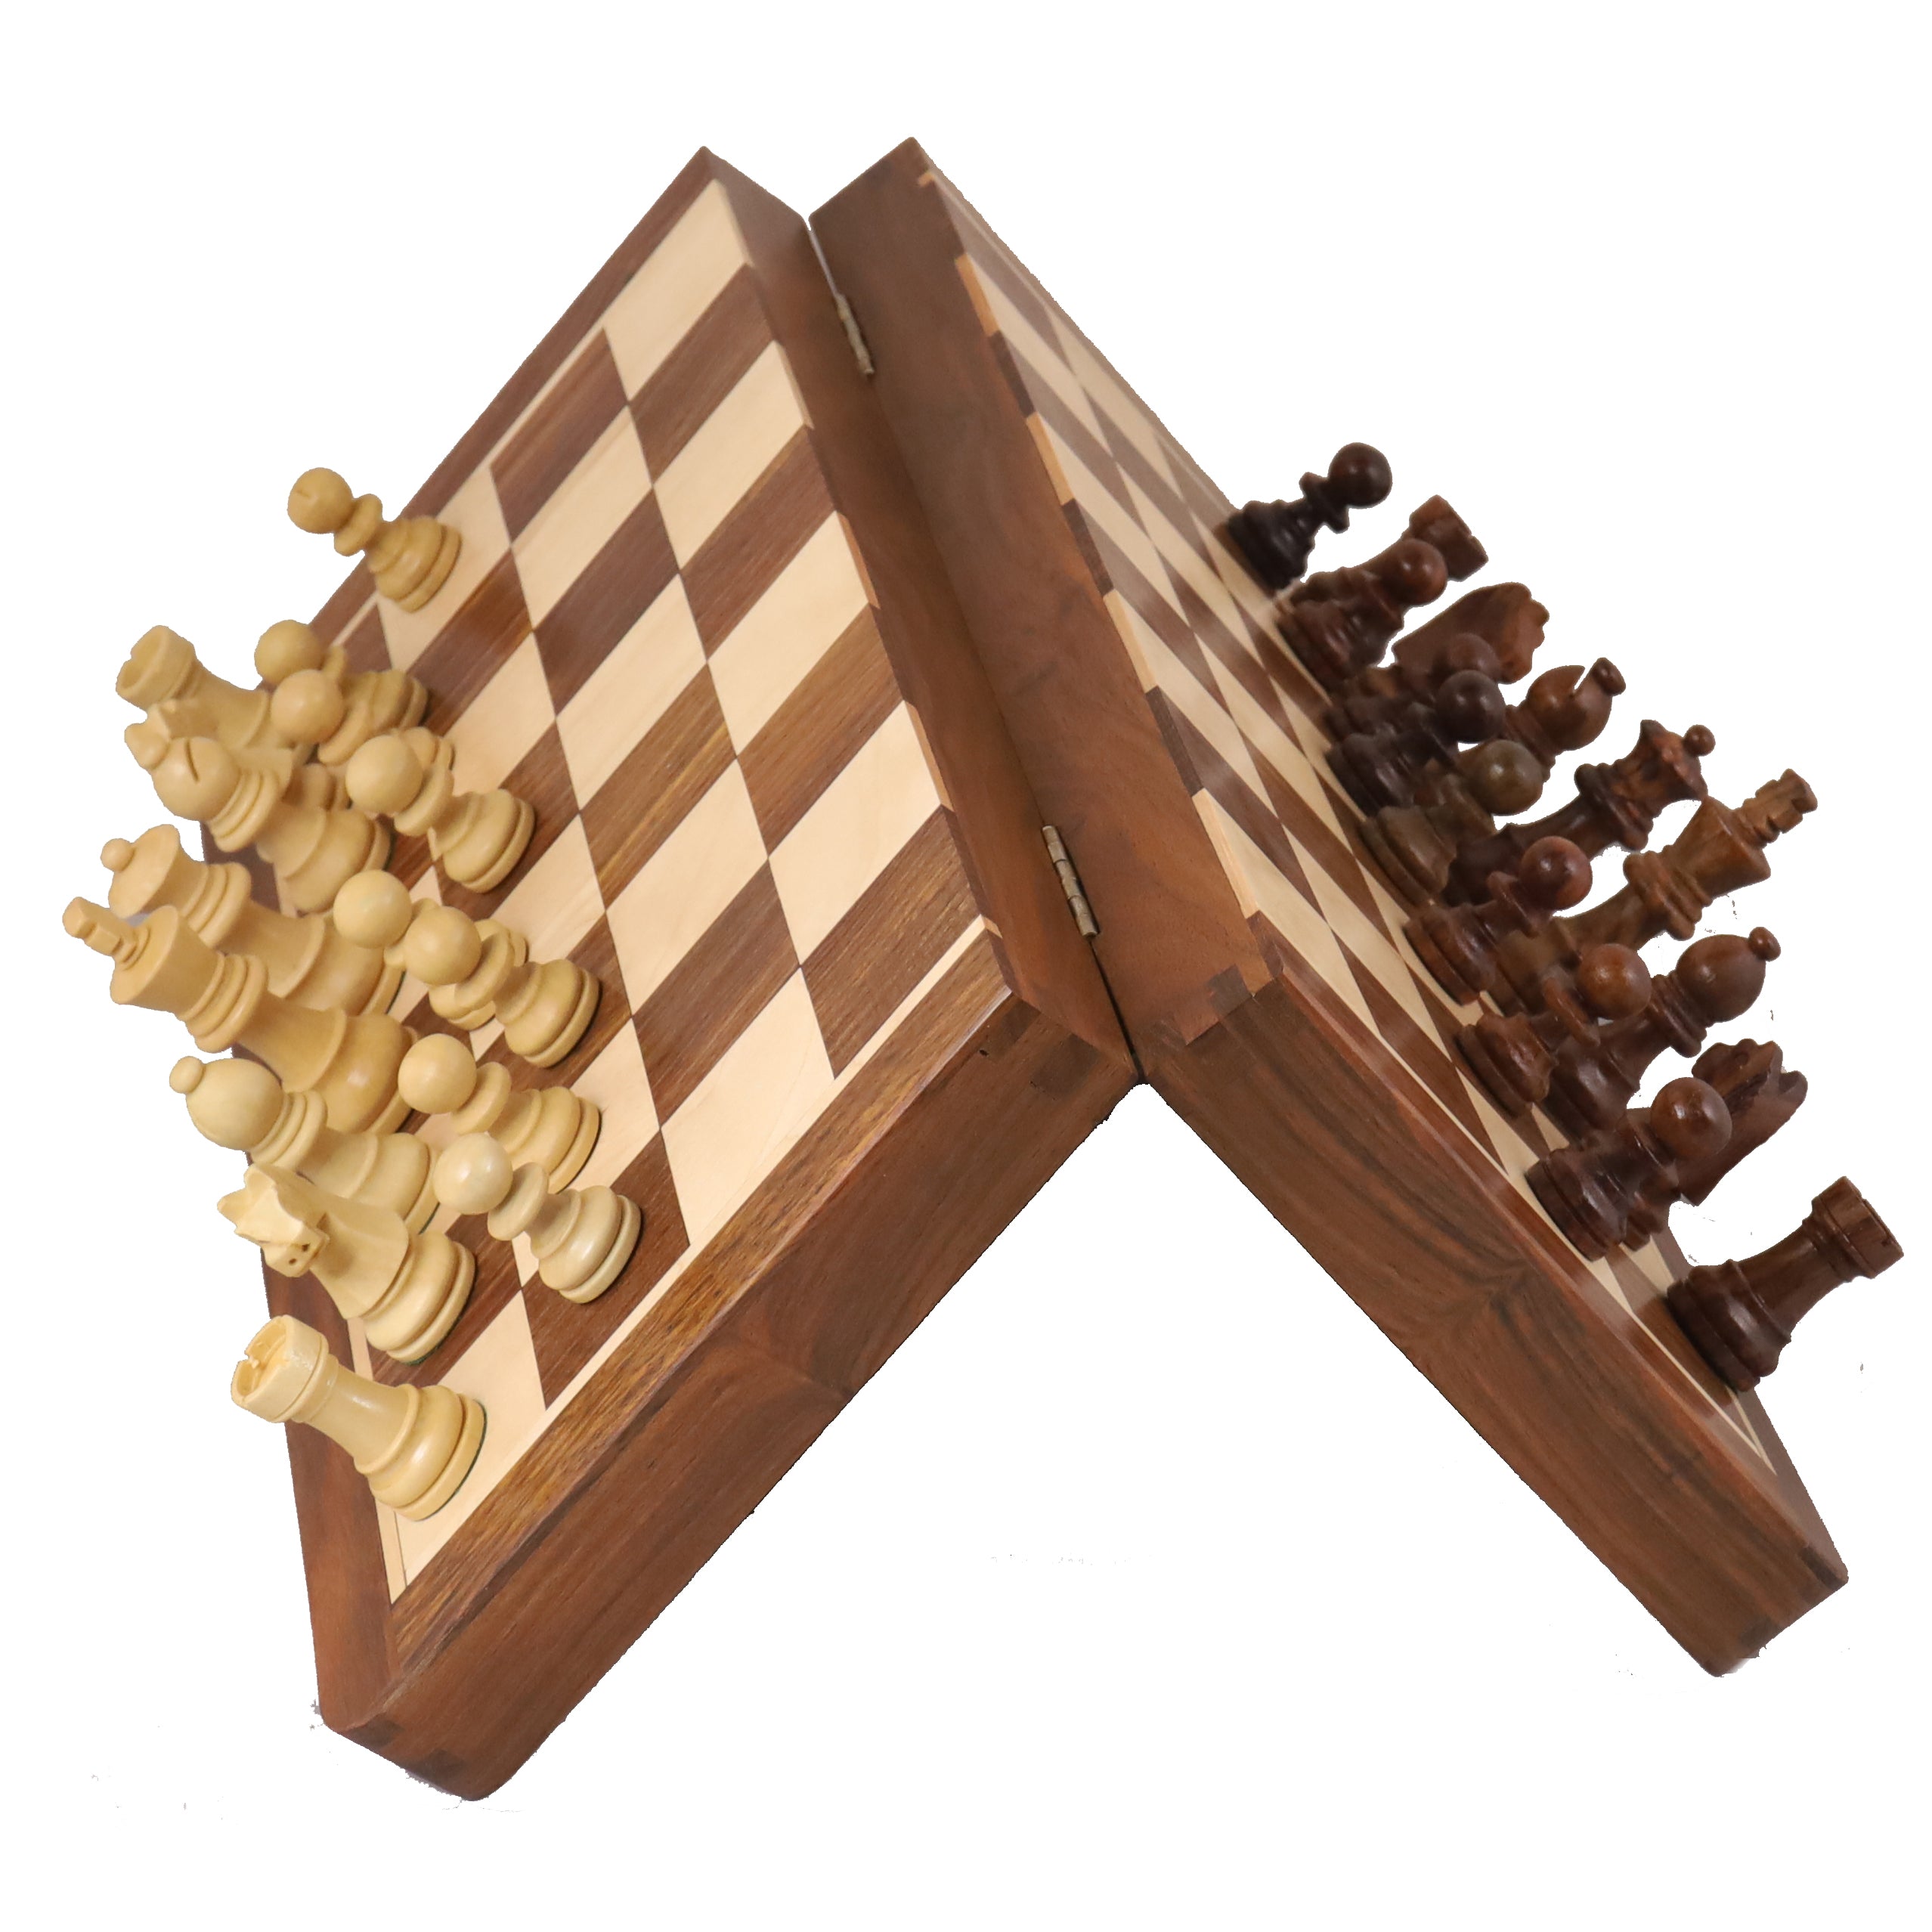 Large Rosewood & Maple Wooden Inlaid Magnetic Chess Set Board For Travel